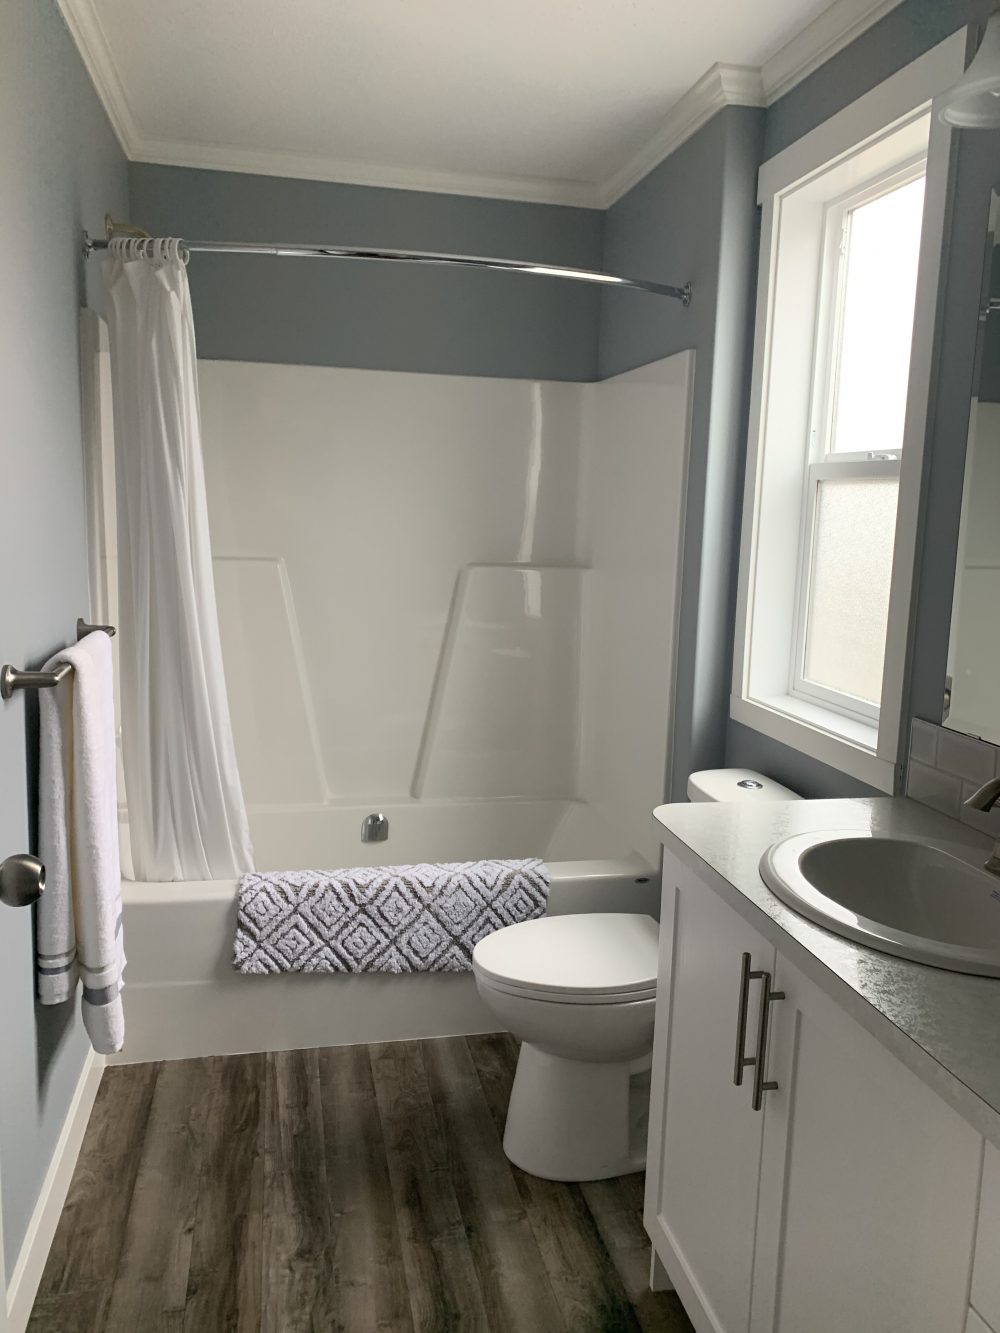 first bathroom in the kelowna showhome built by countryside manufactured homes in salmon arm bc tub surround and single sink and toilet